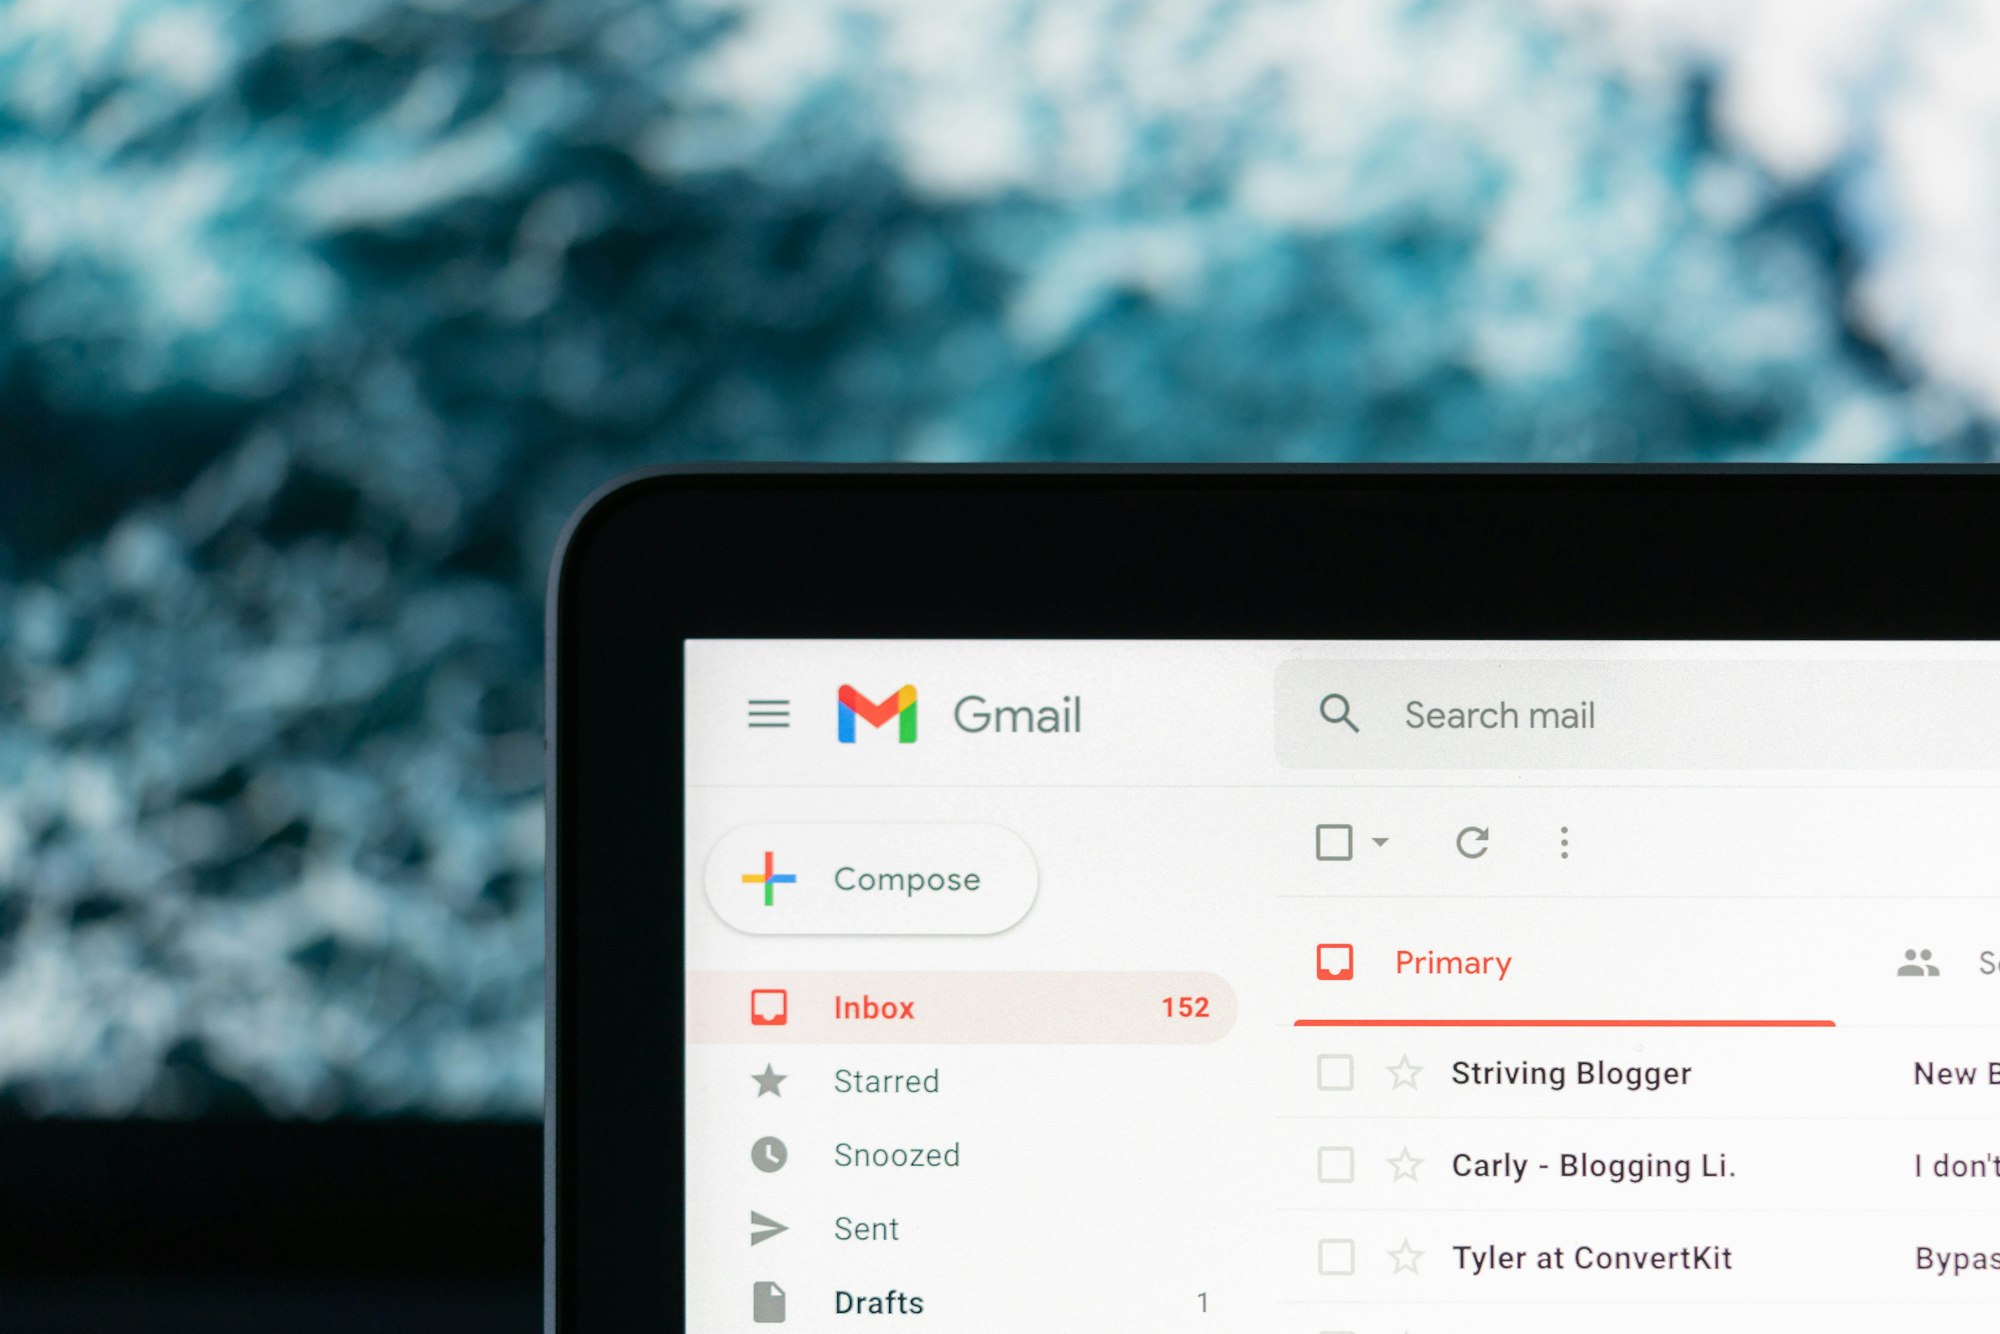 How to Increase "Undo Send" Time in Gmail